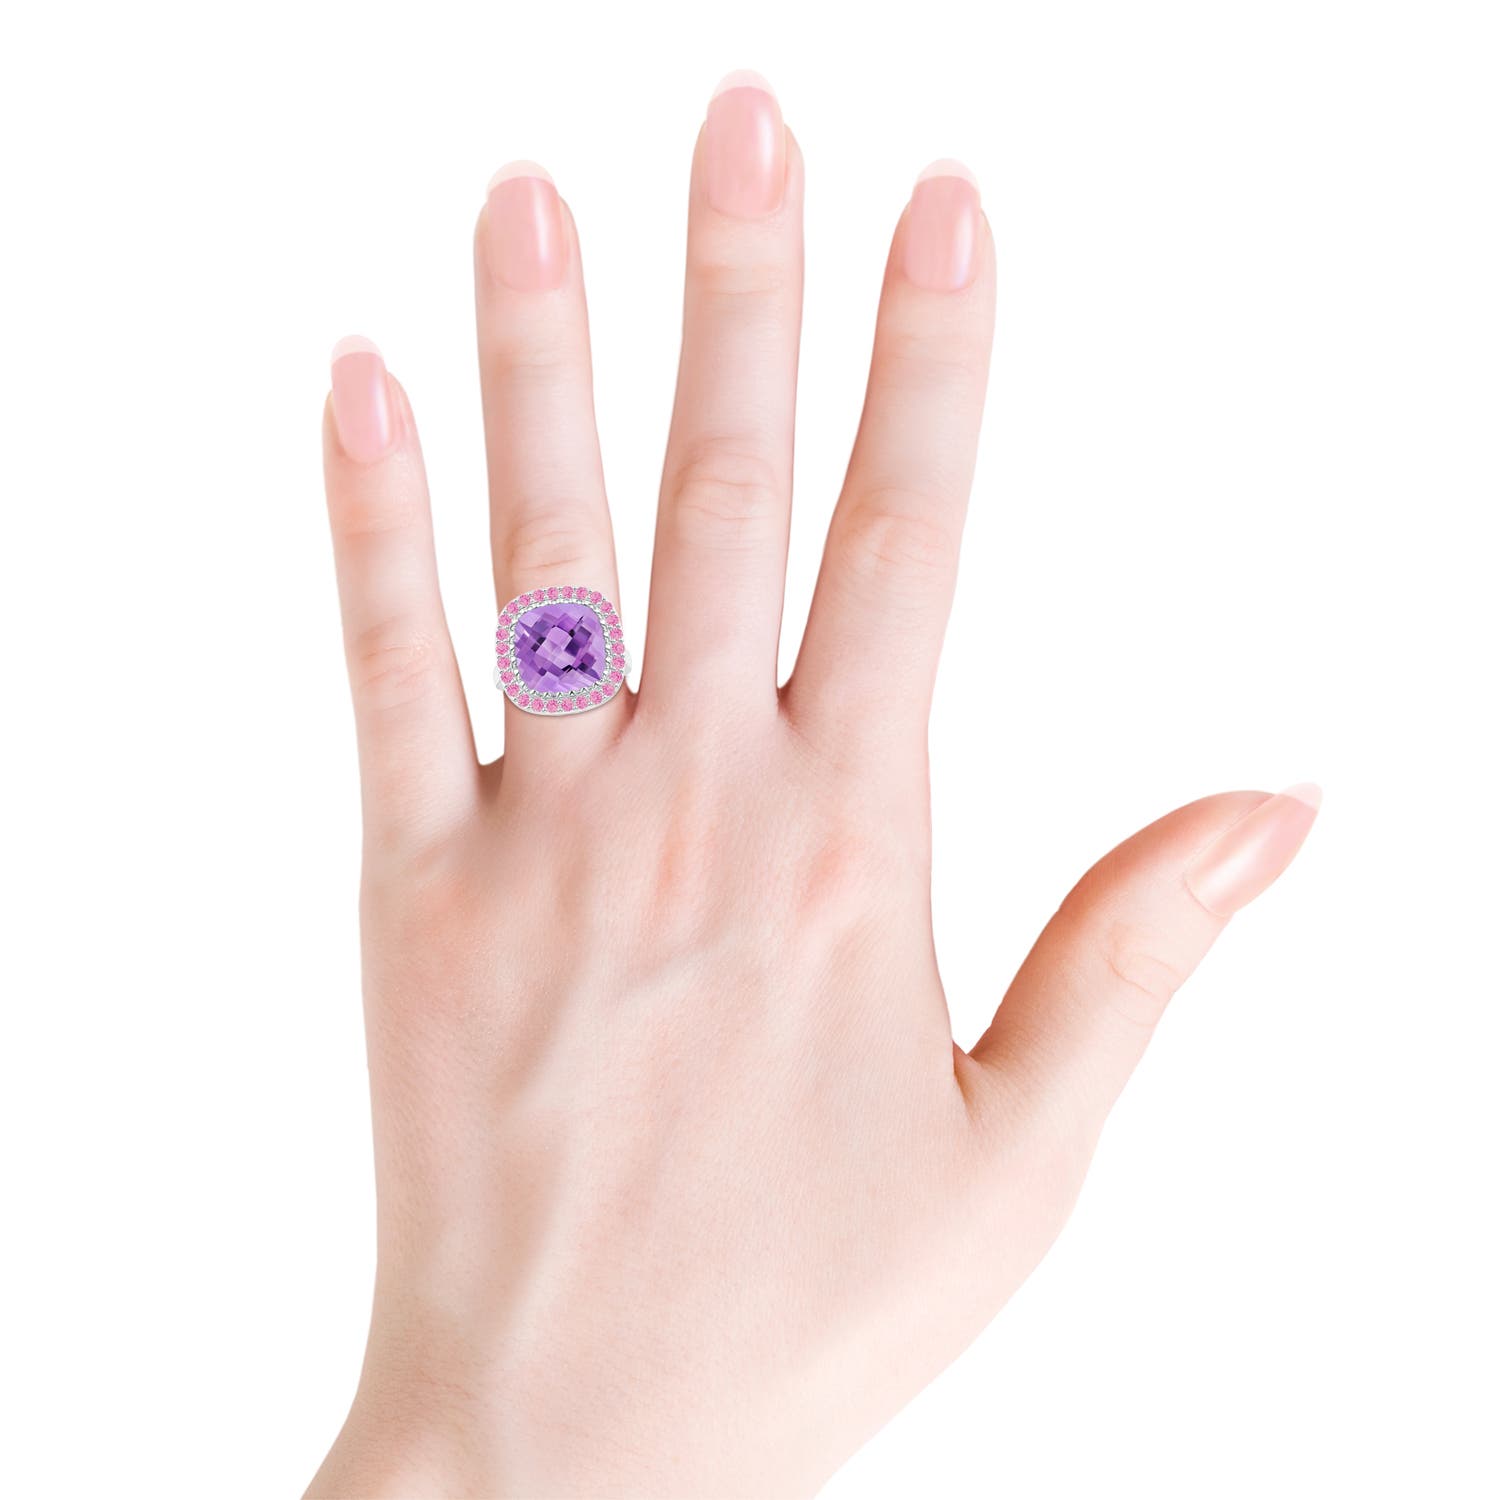 A - Amethyst / 6.98 CT / 14 KT White Gold